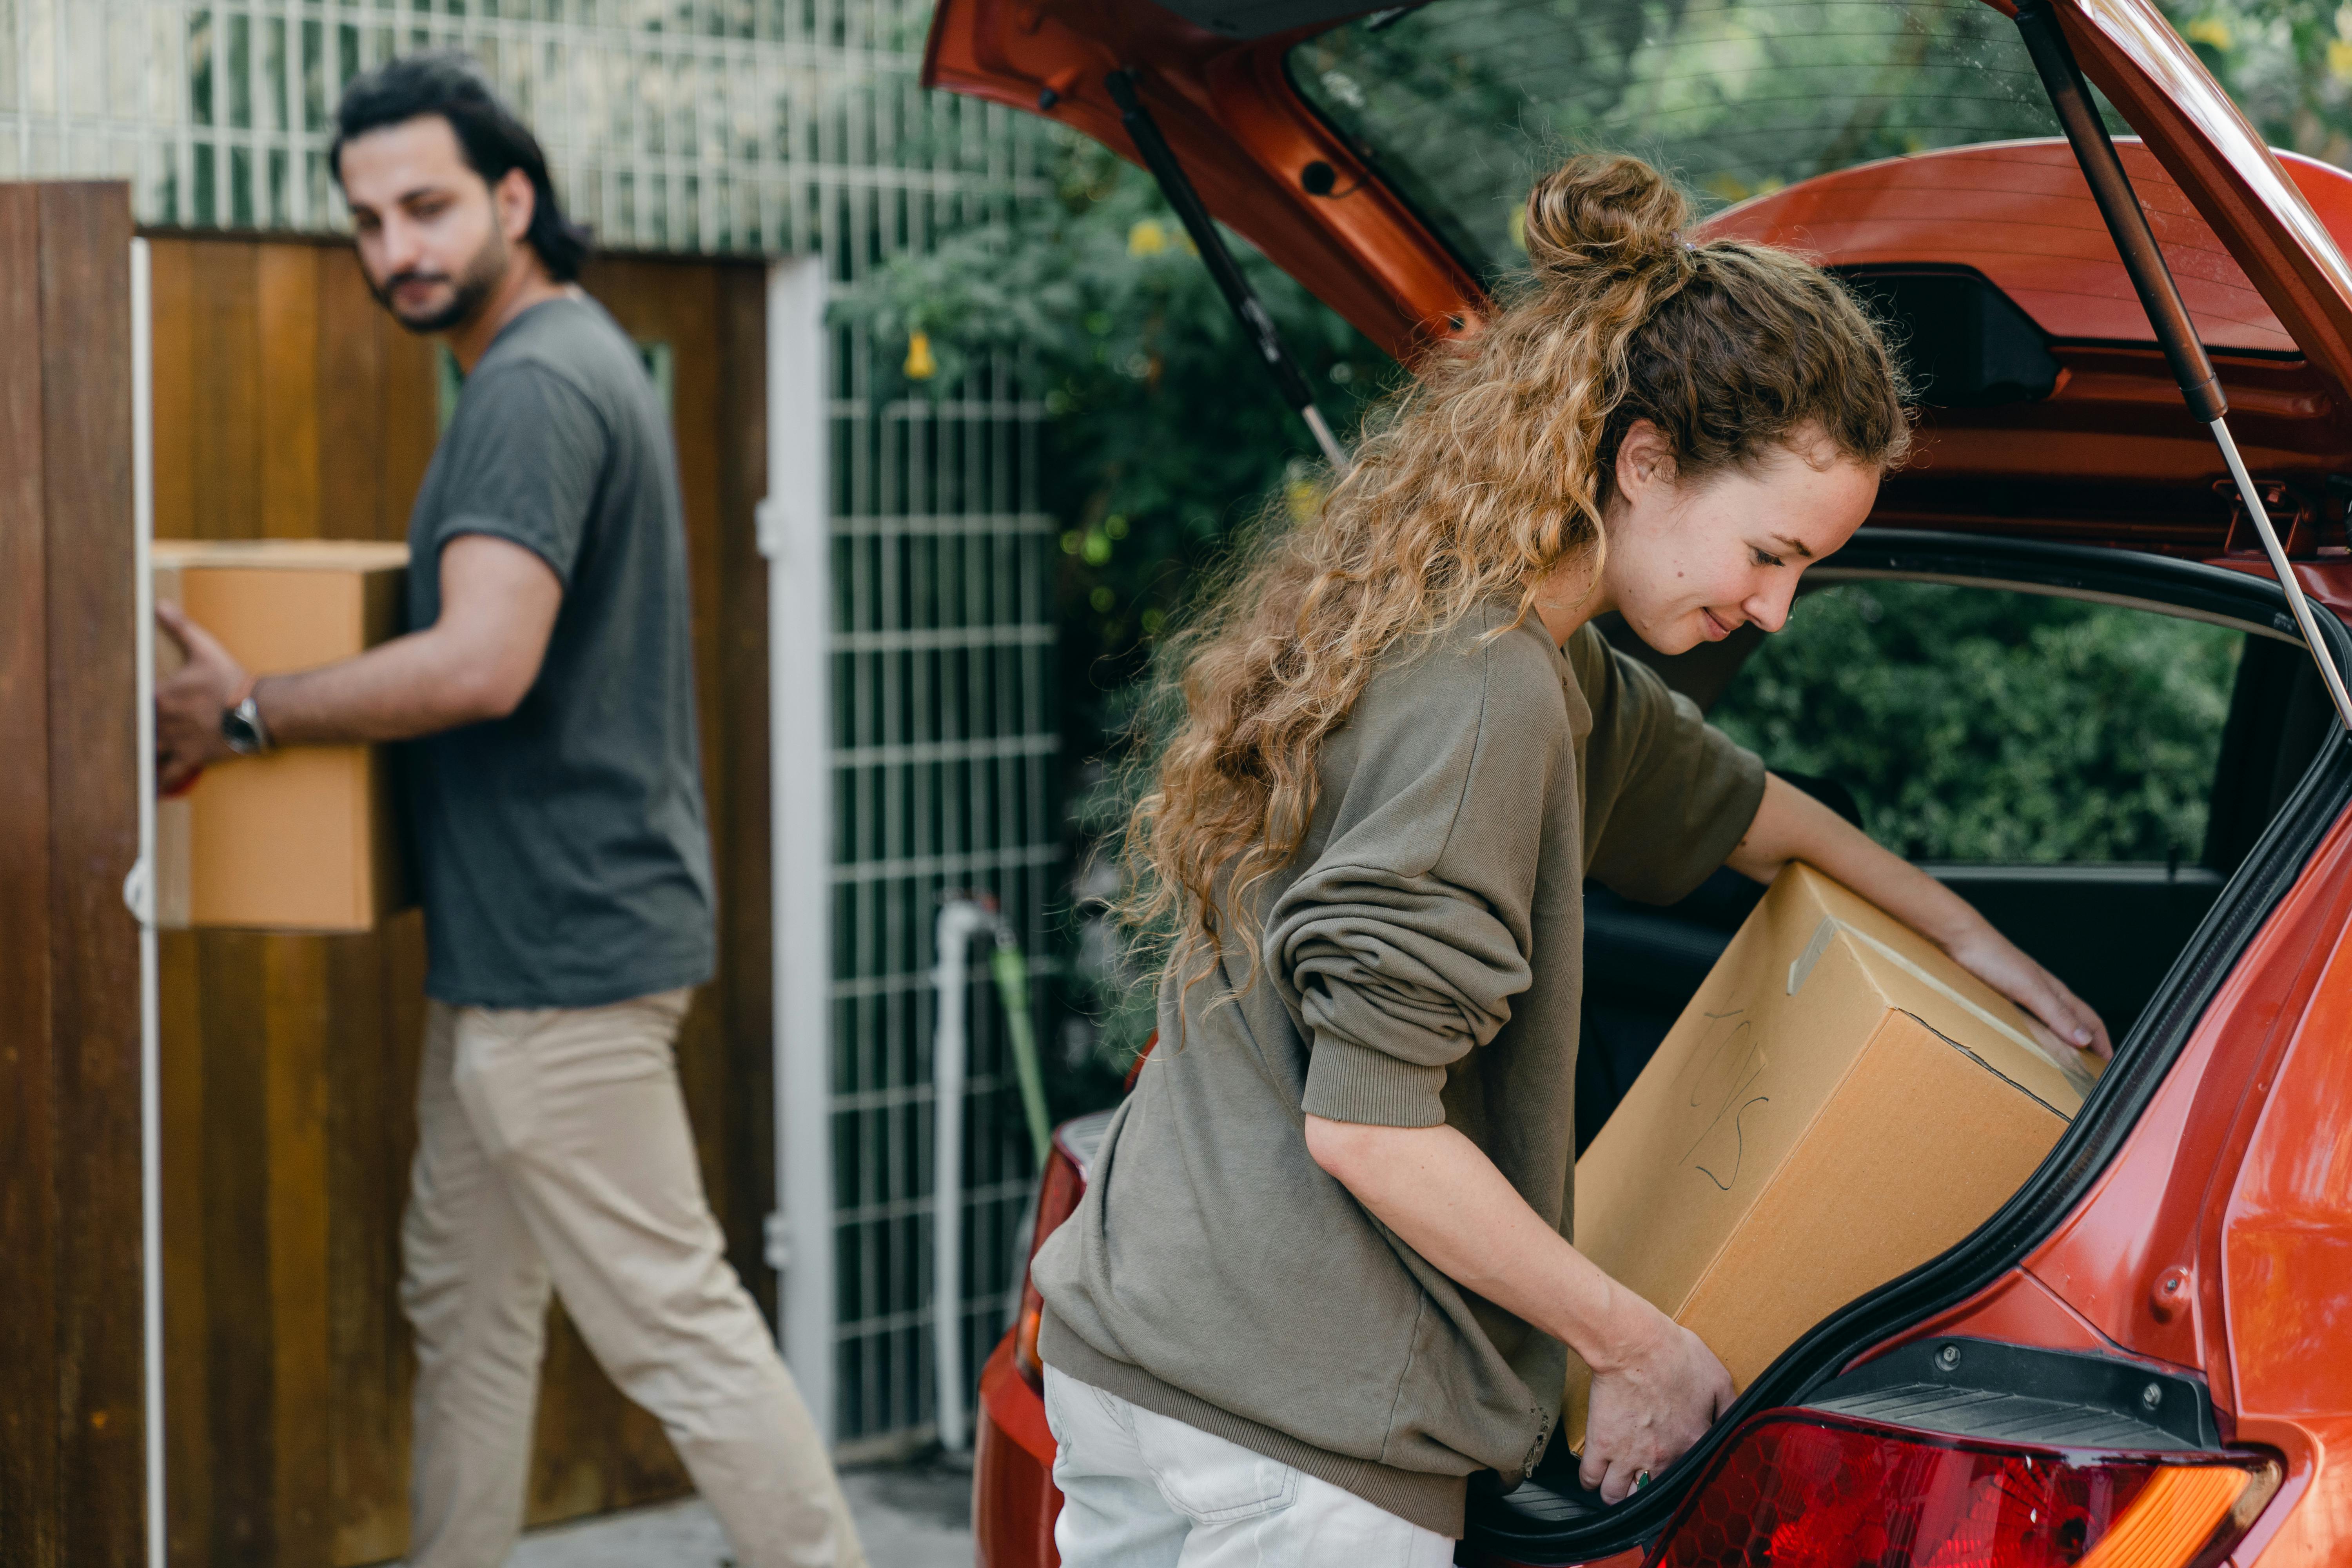 A couple moving out | Source: Pexels